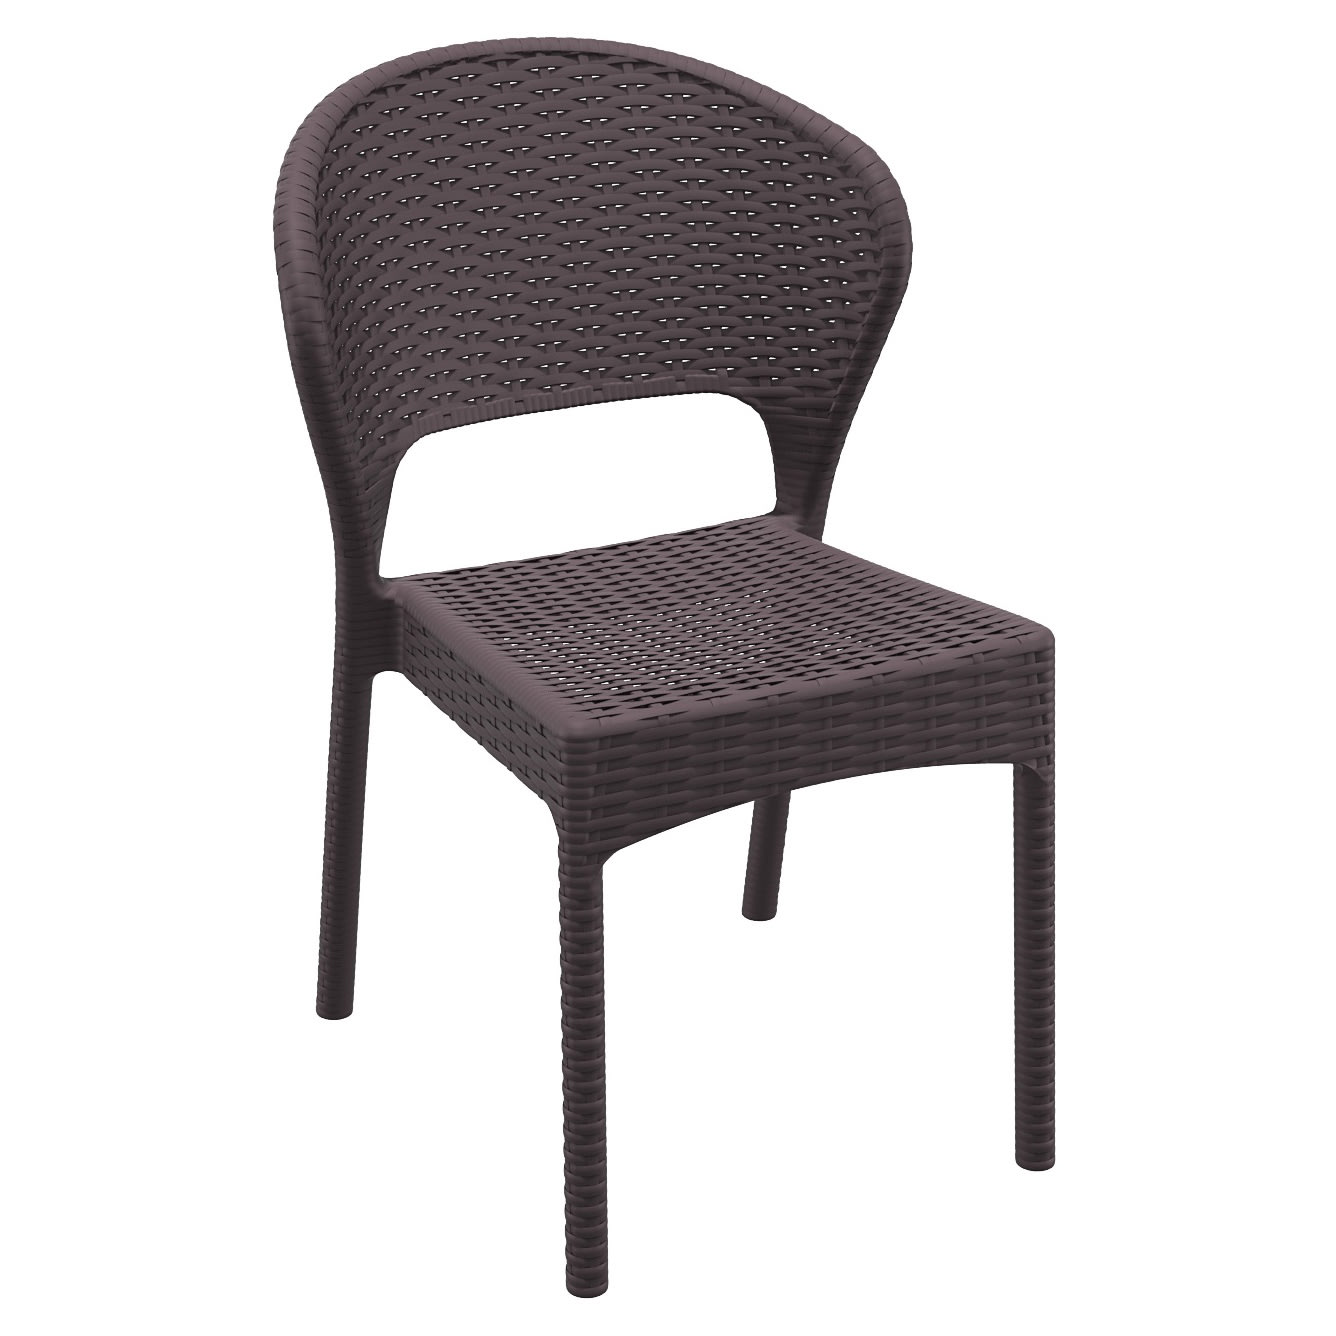 Terrace Wicker Look Resin Patio Chair with Terrace Wicker Look Resin Patio Chair